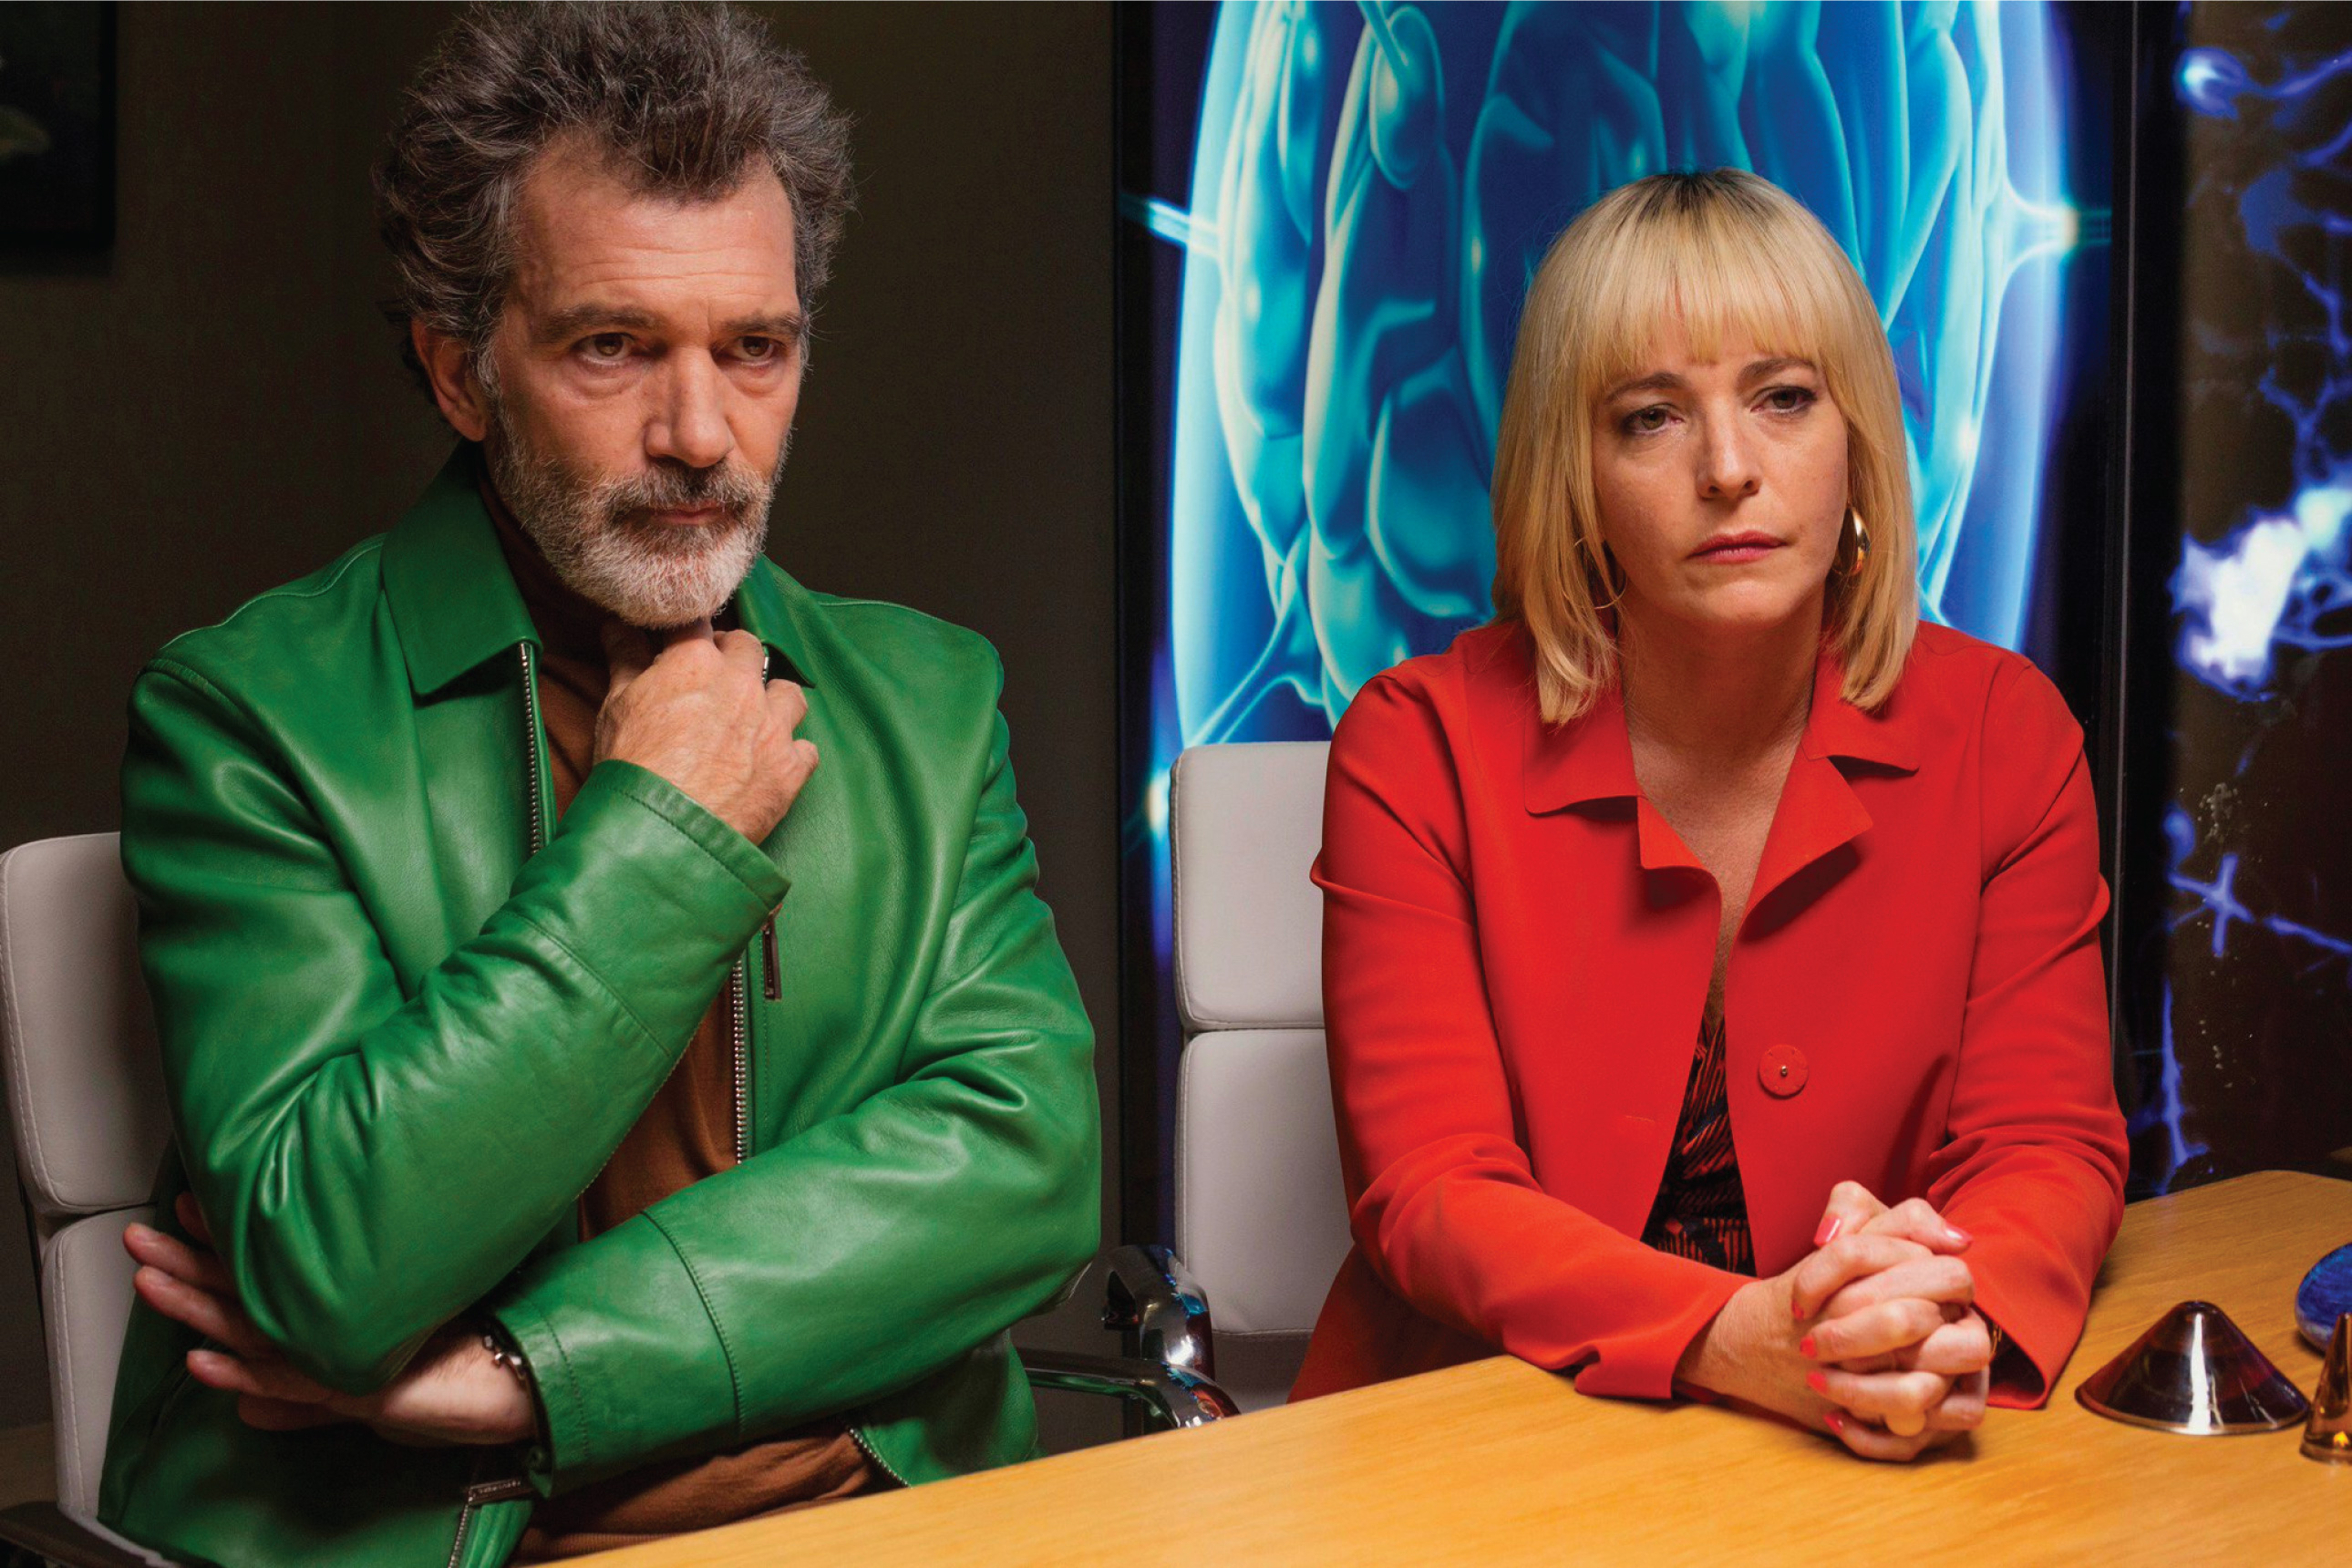 Almodóvar’s depiction of his own pain feels intimate and confessional.